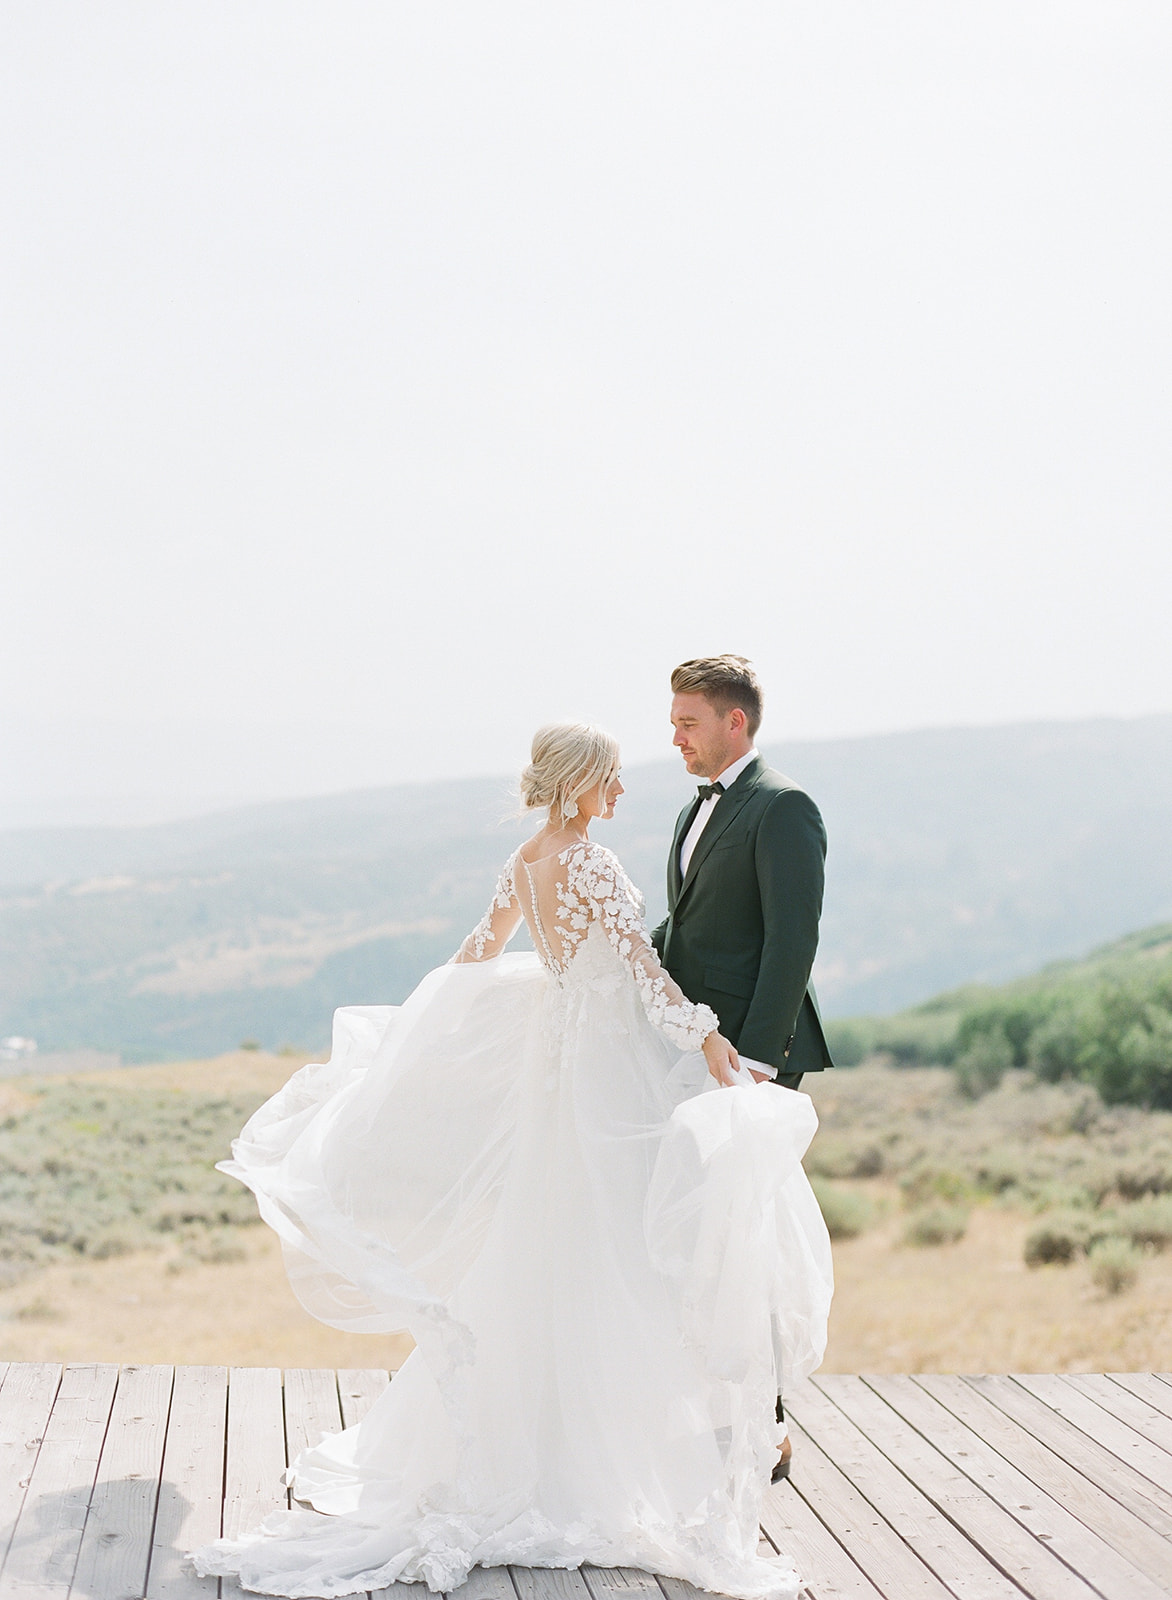 Groom with Real Bride Wearing 3-D Floral Lace Sheath Wedding Dress with Overskirt by Maggie Sottero